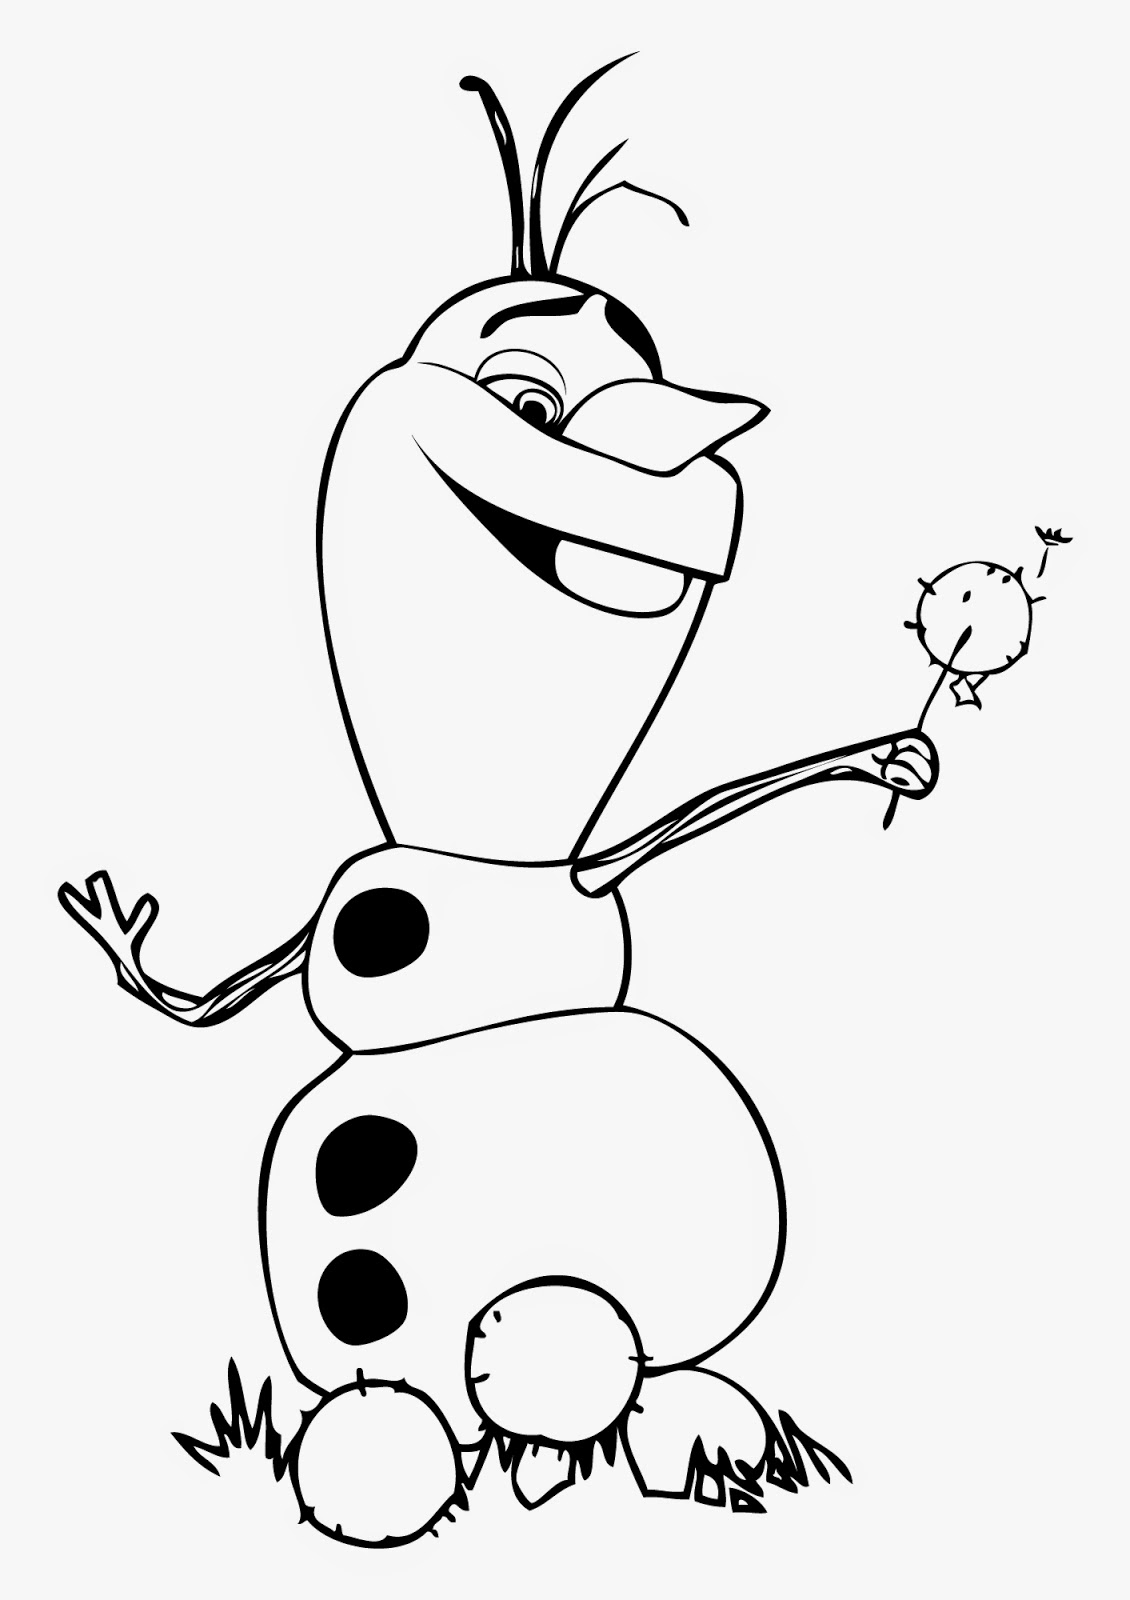 Frozens Olaf Coloring Pages - Best Coloring Pages For Kids